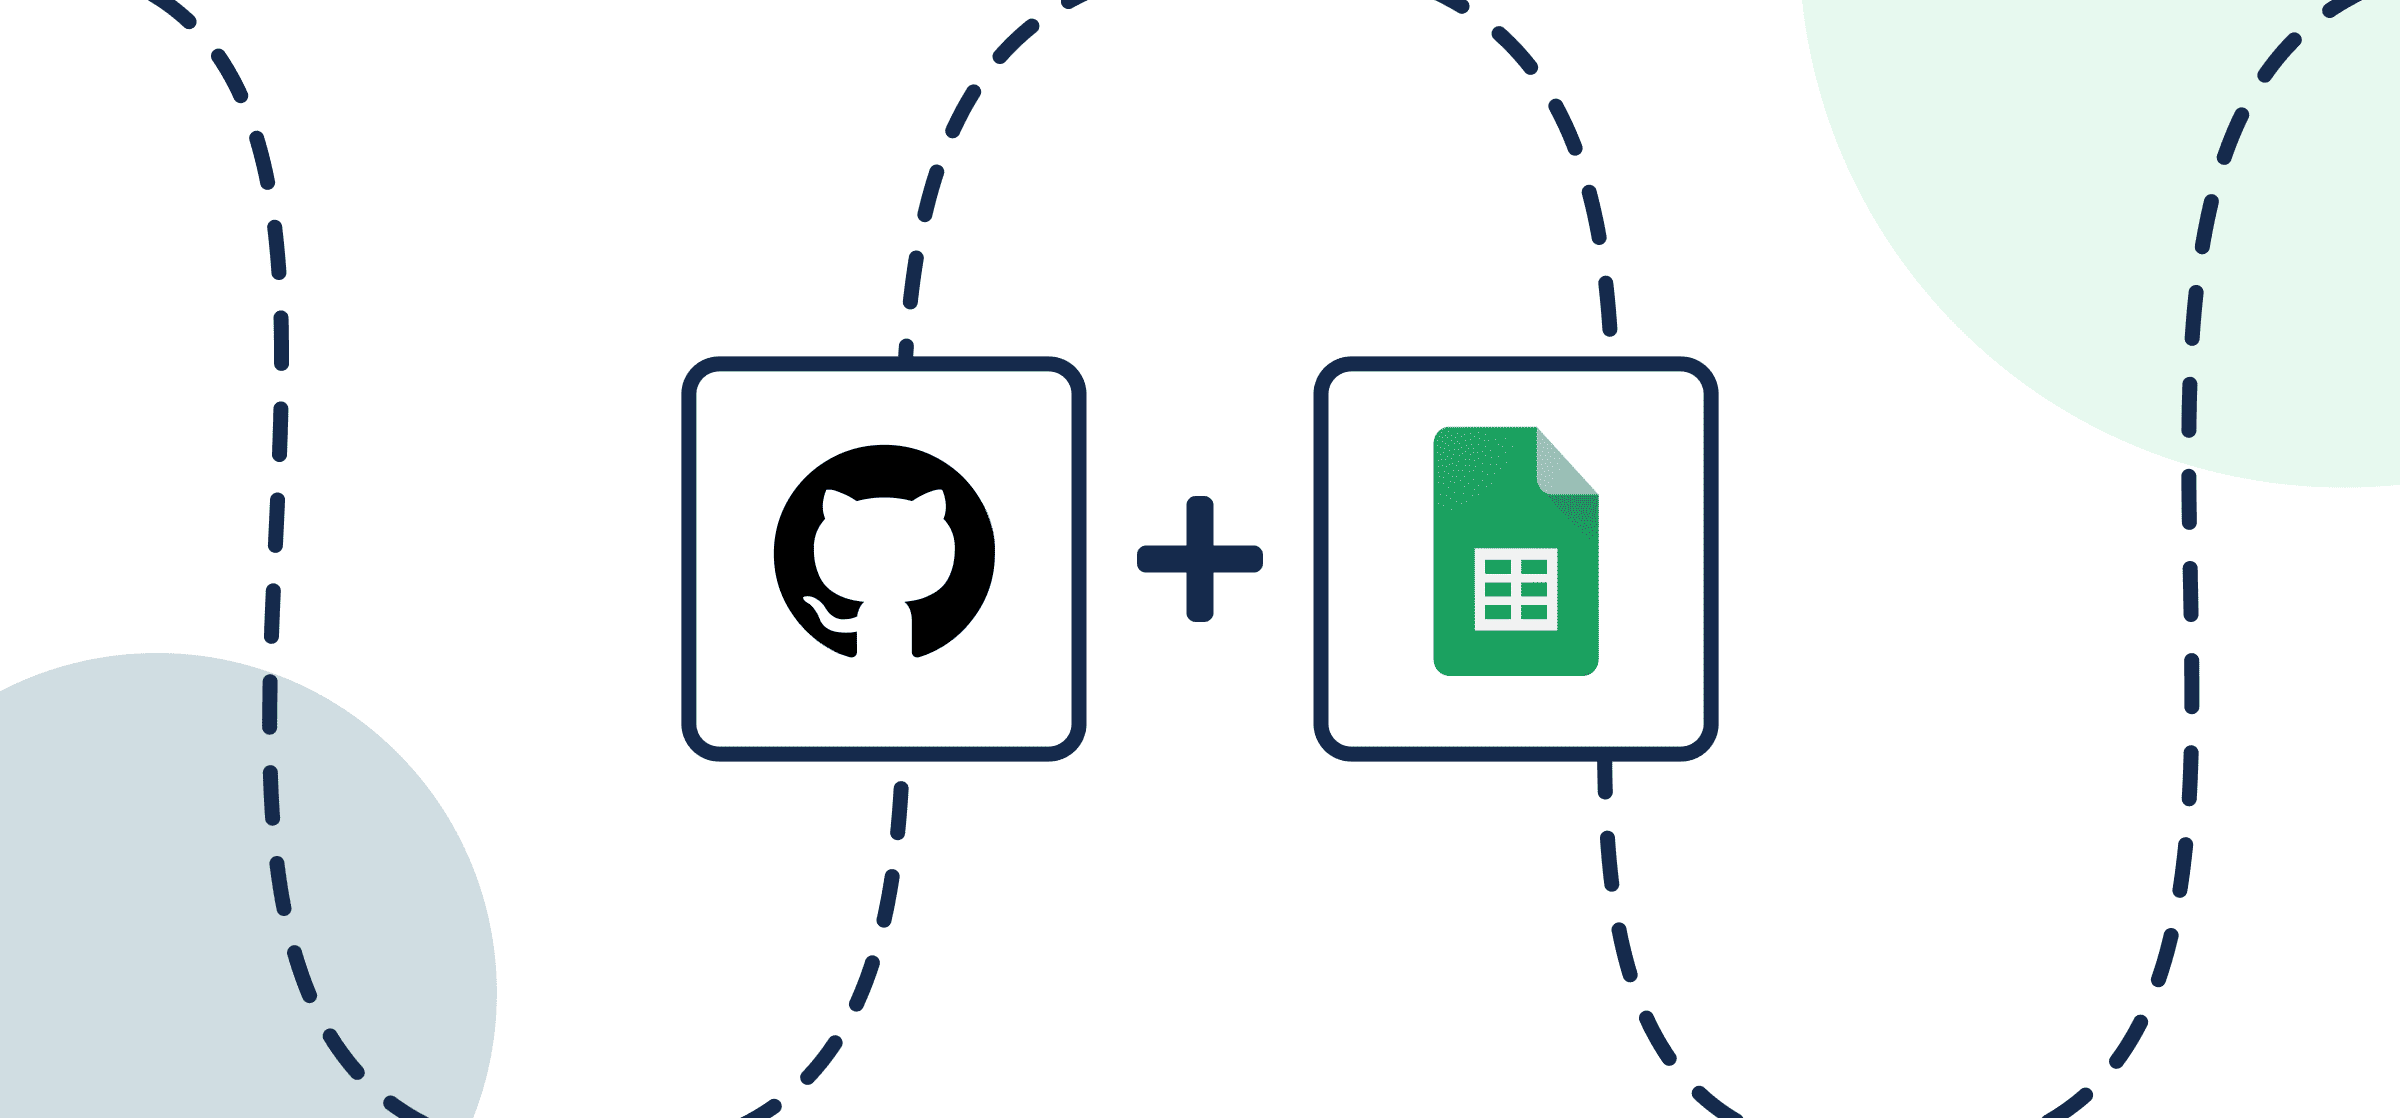 Featured image illustrating a step-by-step guide on syncing GitHub issues to Google Sheets using Unito, depicted by the connected logos of GitHub and Google Sheets through circles and dotted lines.